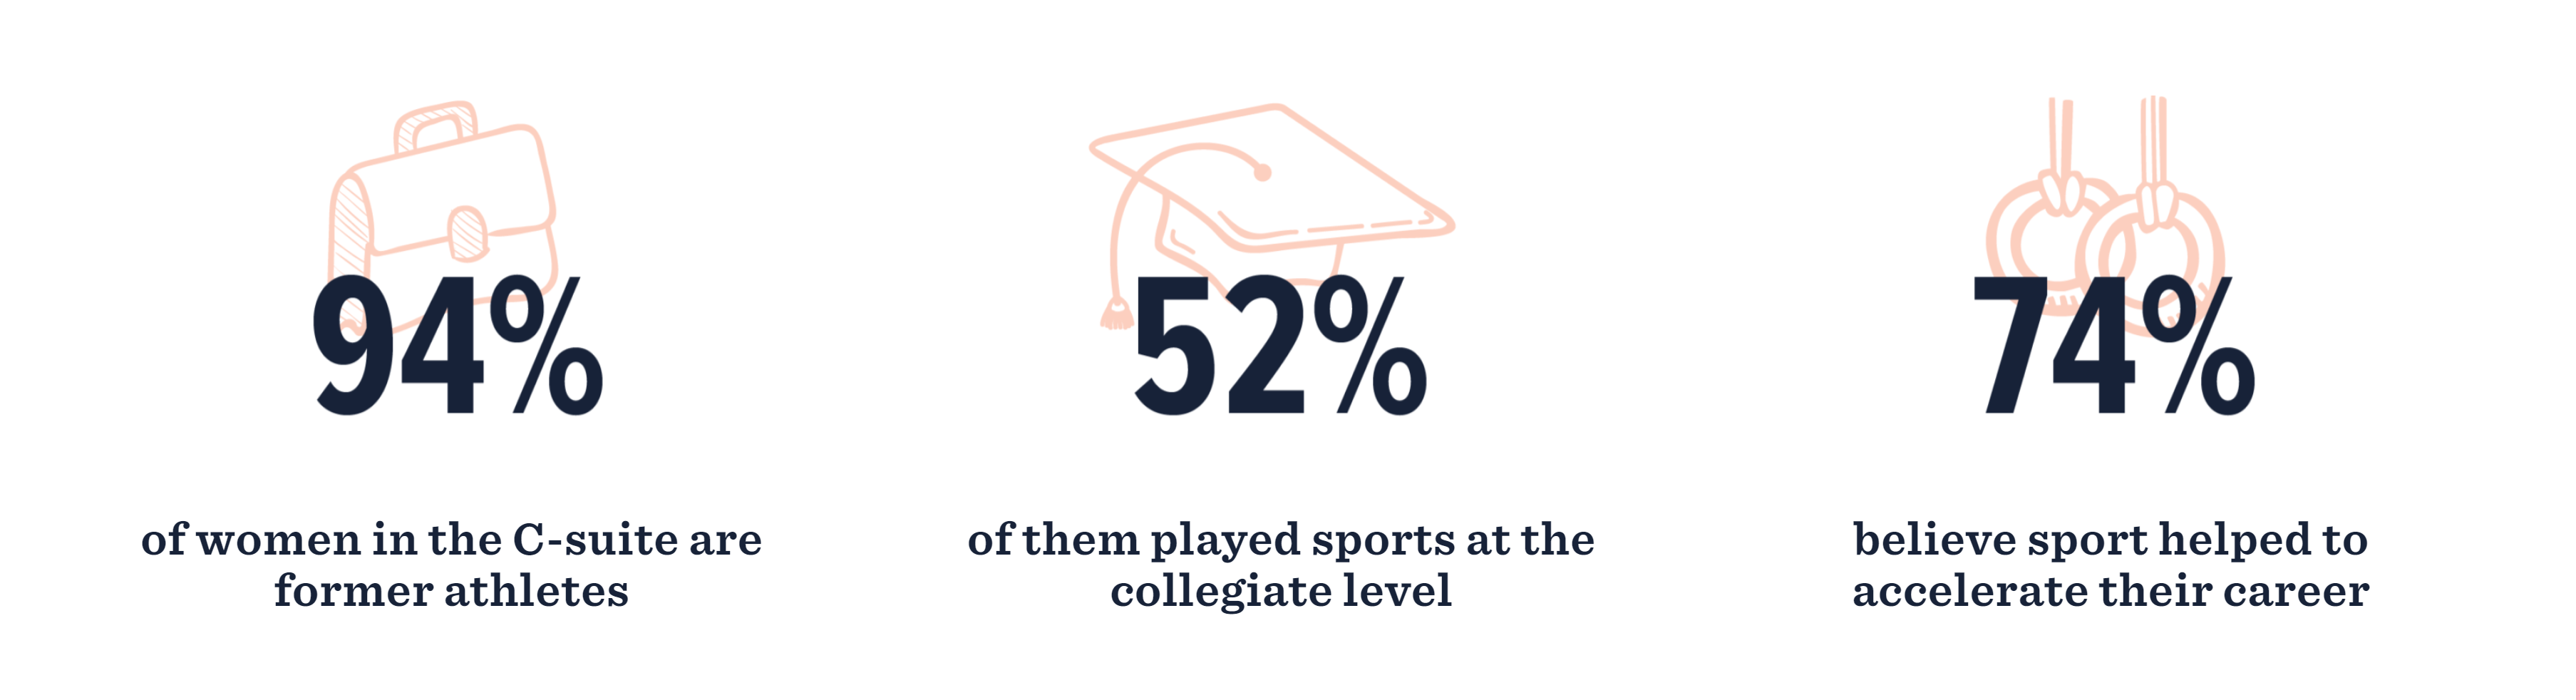 94% of women in the C-suite are former athletes. 52% of them played sports at the collegiate level. 74% believe sport helped to accelerate their career.